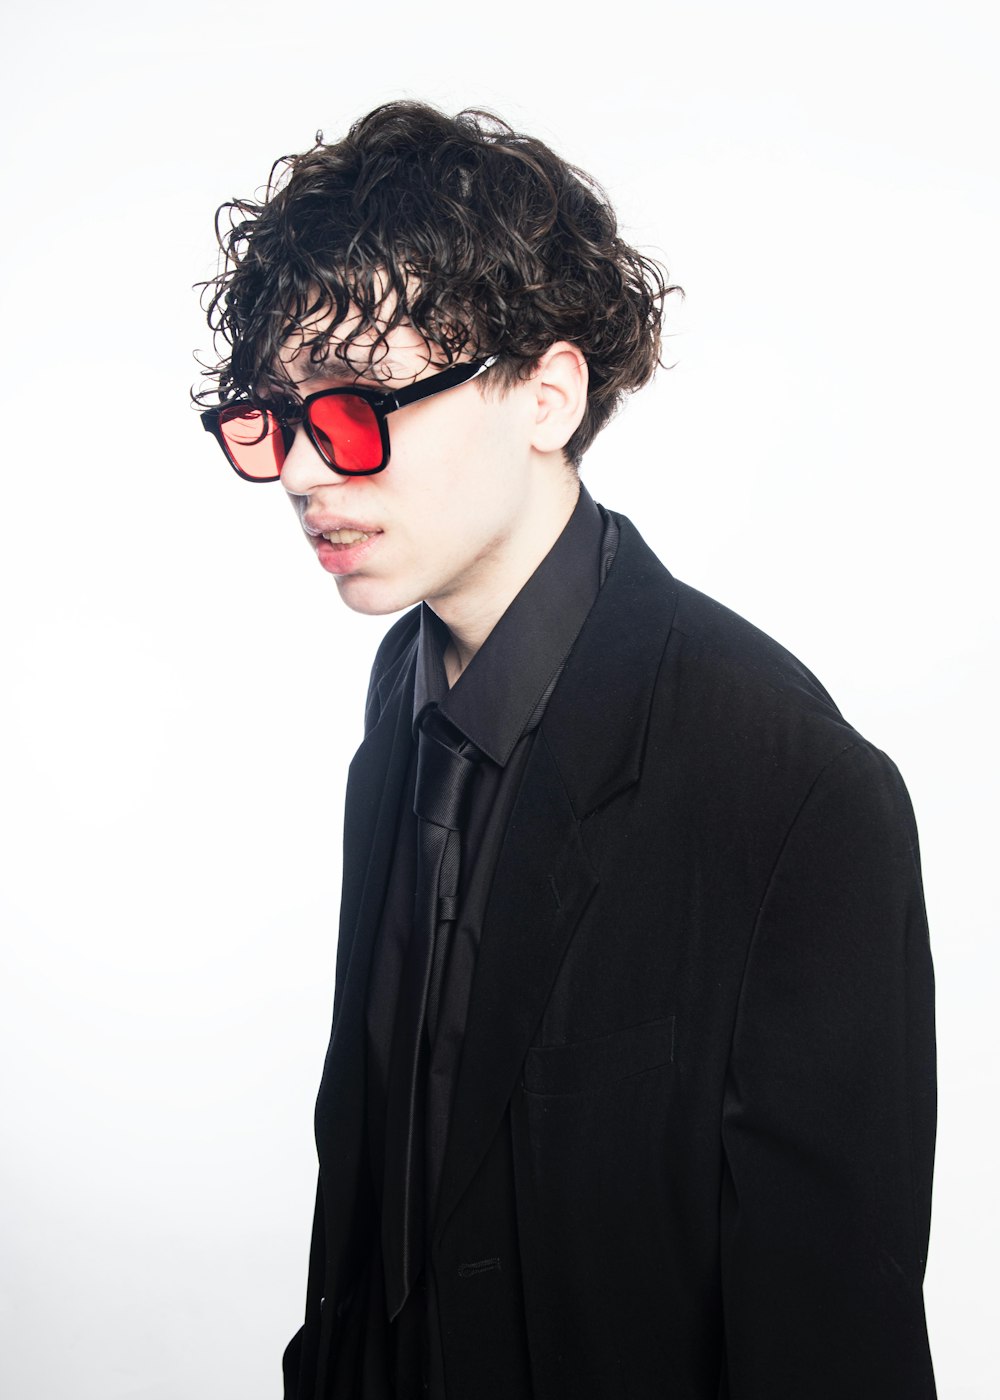 a man with curly hair wearing red sunglasses